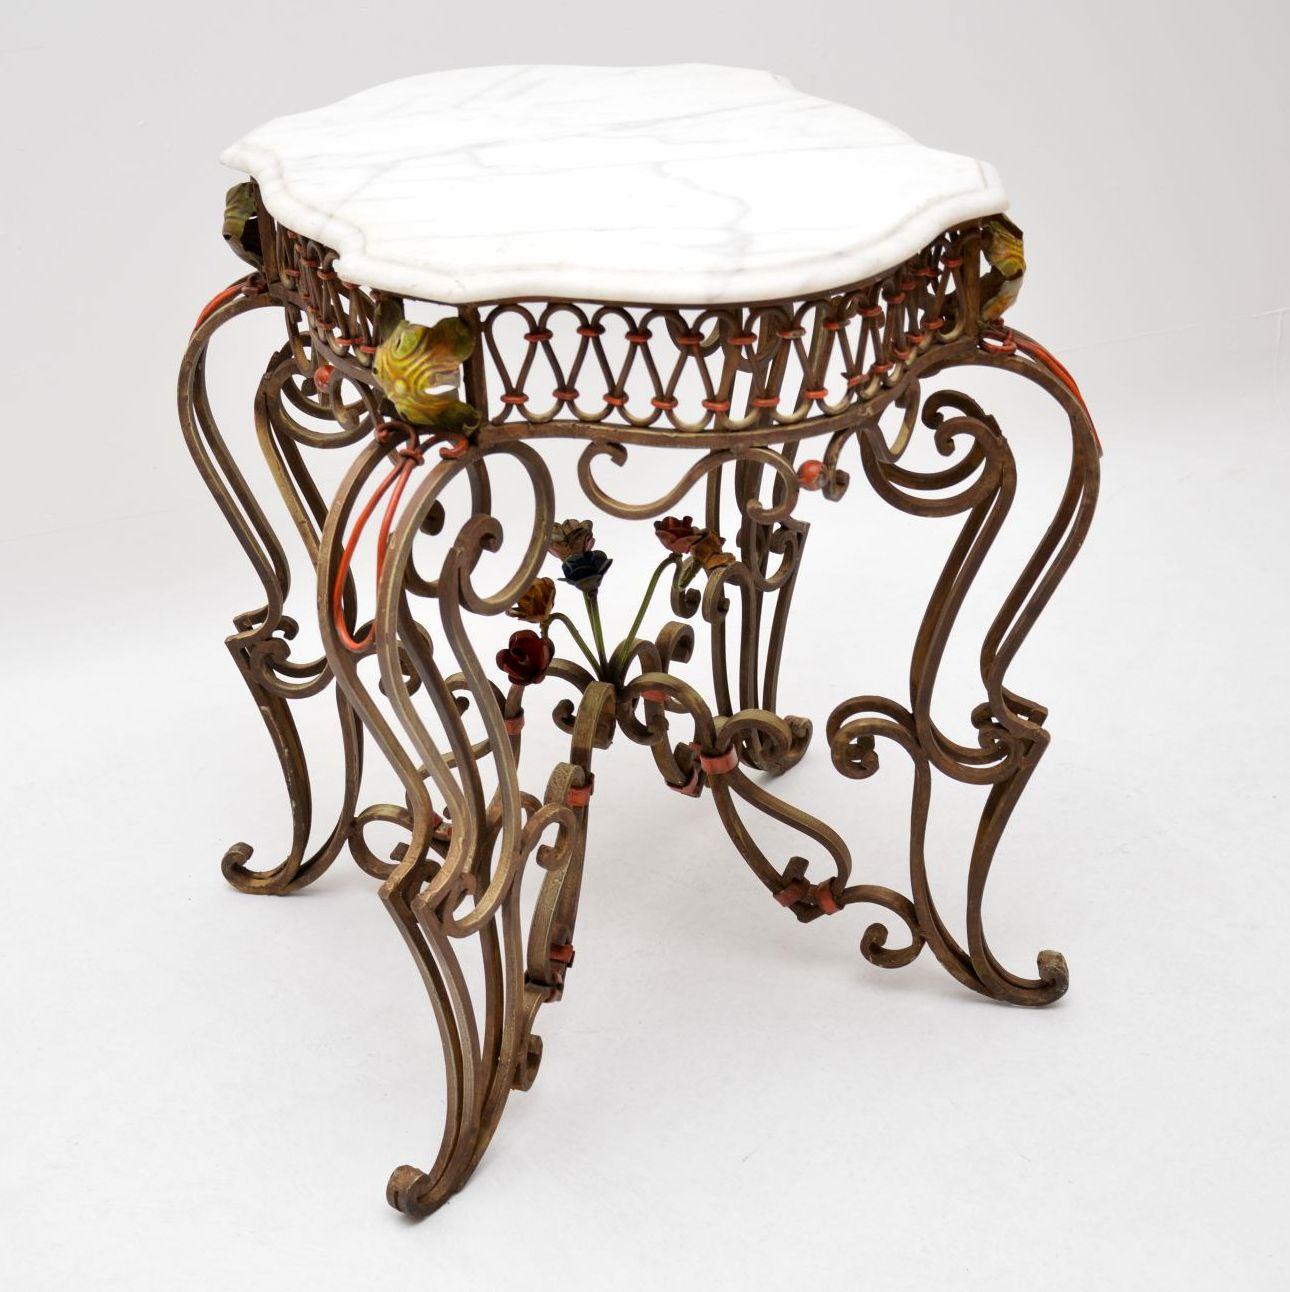 This antique marble top iron table is in excellent condition and has some wonderful features. I believe it’s French and dates to circa 1890-1910 period. The painted features are very colorful and there are various colored flowers too. It has an